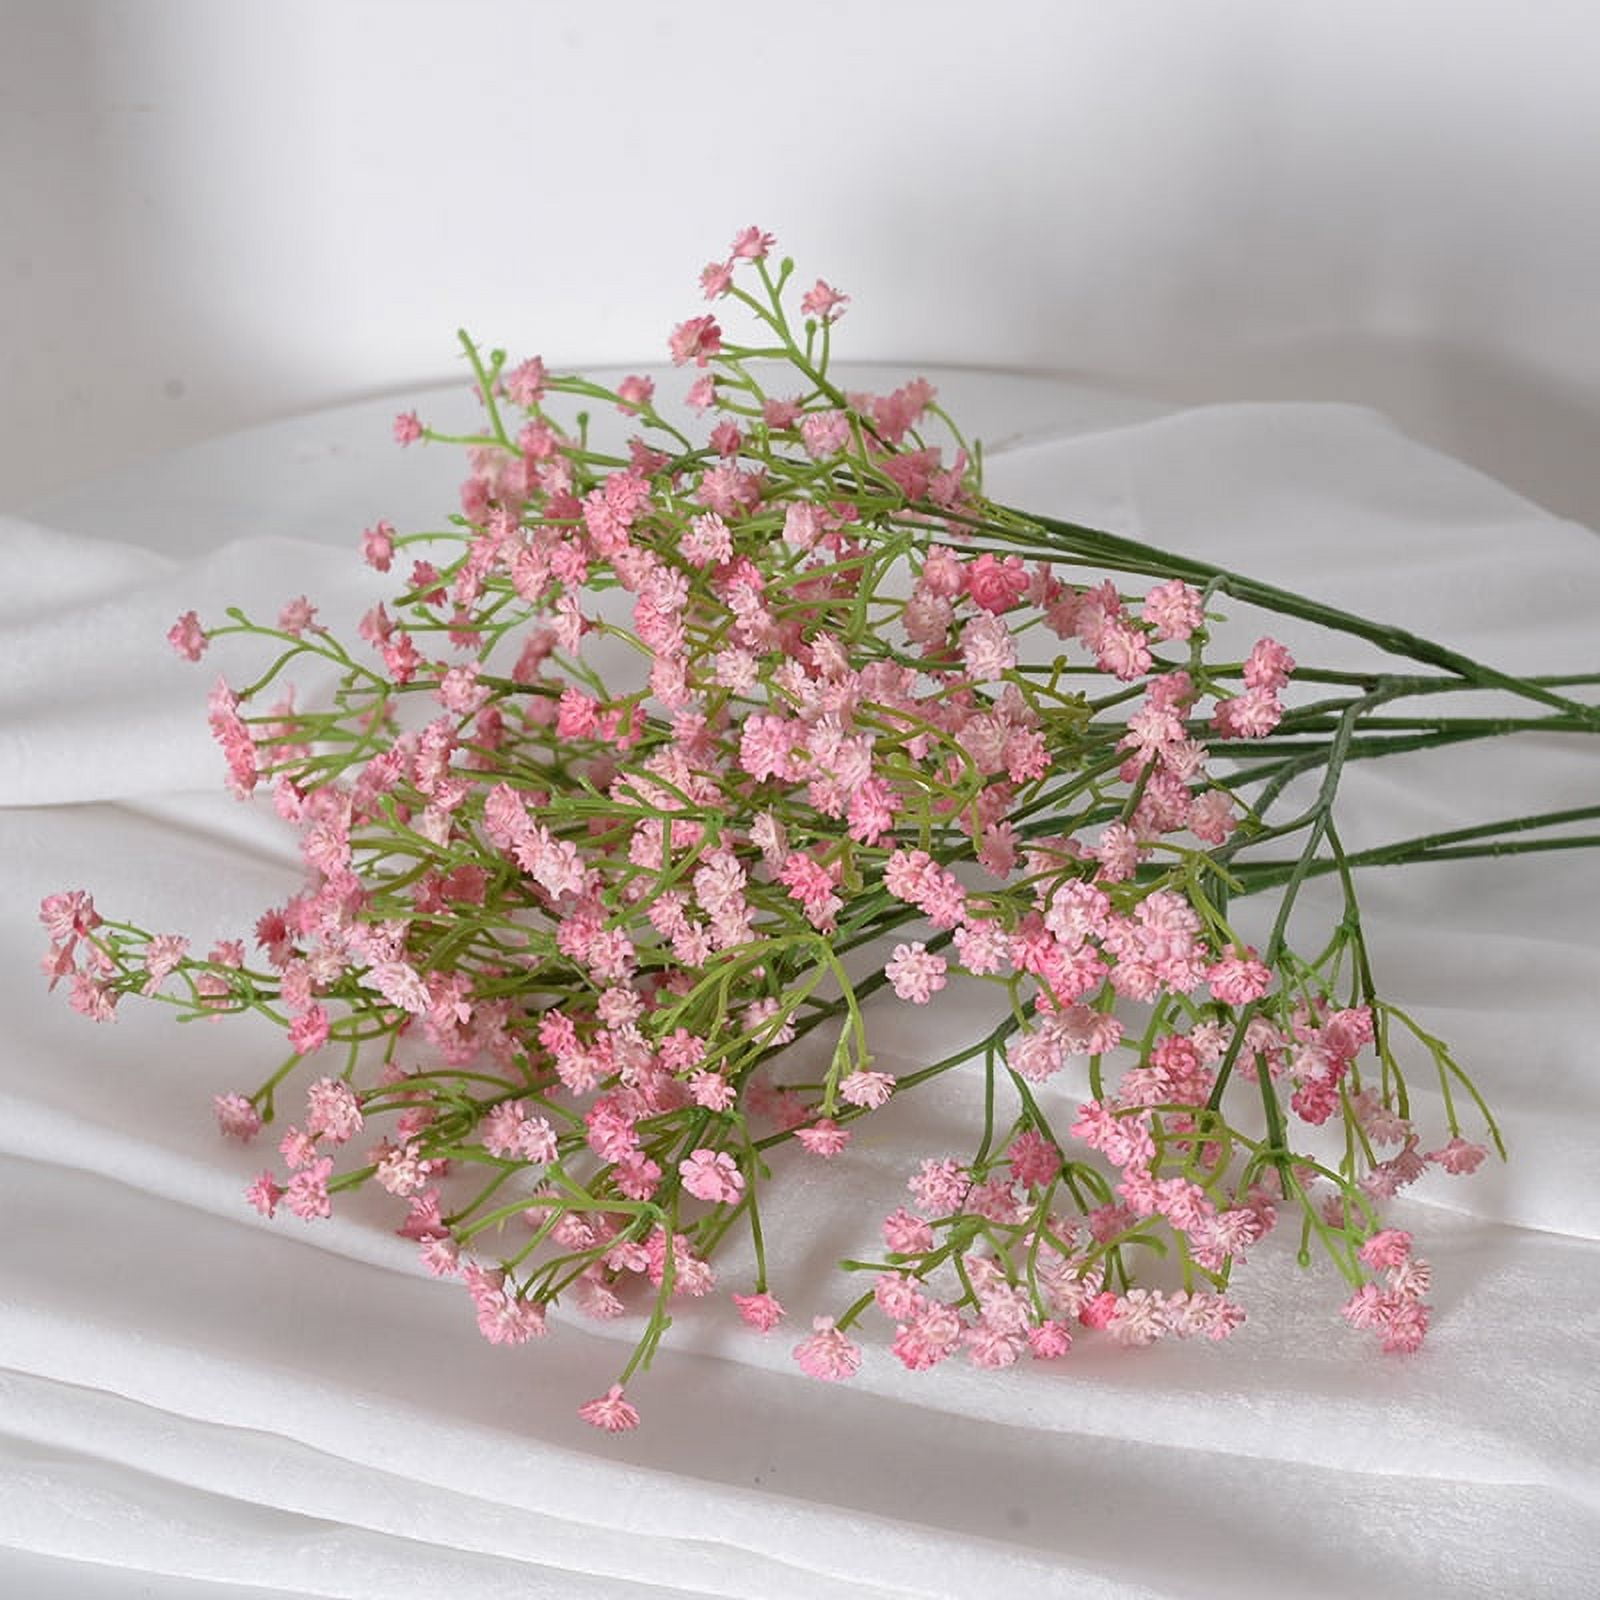 Yerdos 90 Heads 52cm Babys Breath Artificial Flowers Gypsophila Plastic  Flowers for Home Decorative DIY Wed Party Decoration Fake Flower (10, Pink)